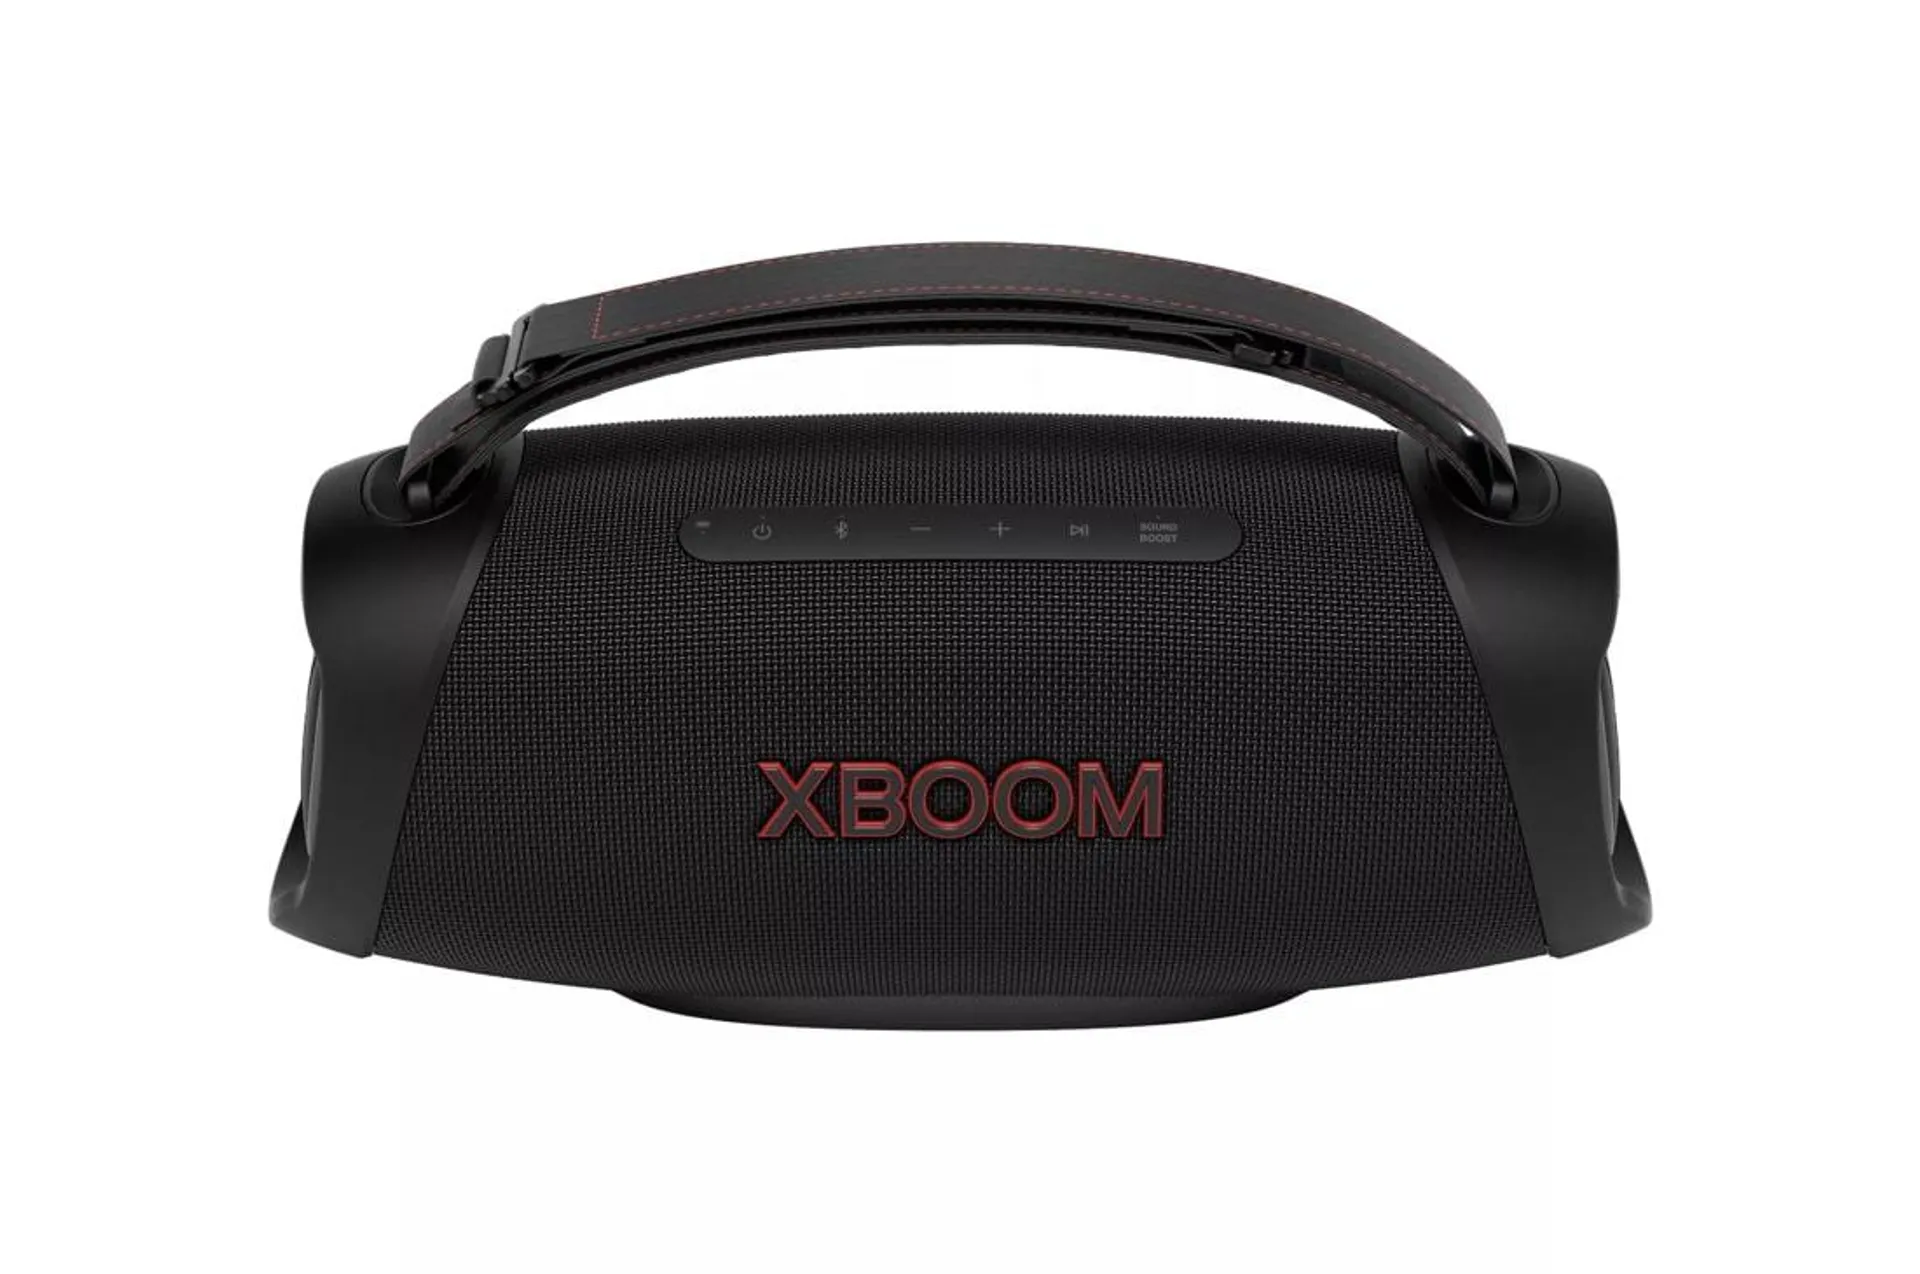 LG XBOOM Go Wireless Speaker with Powerful Sound and up to 15 HRS of Battery XG8T, Black